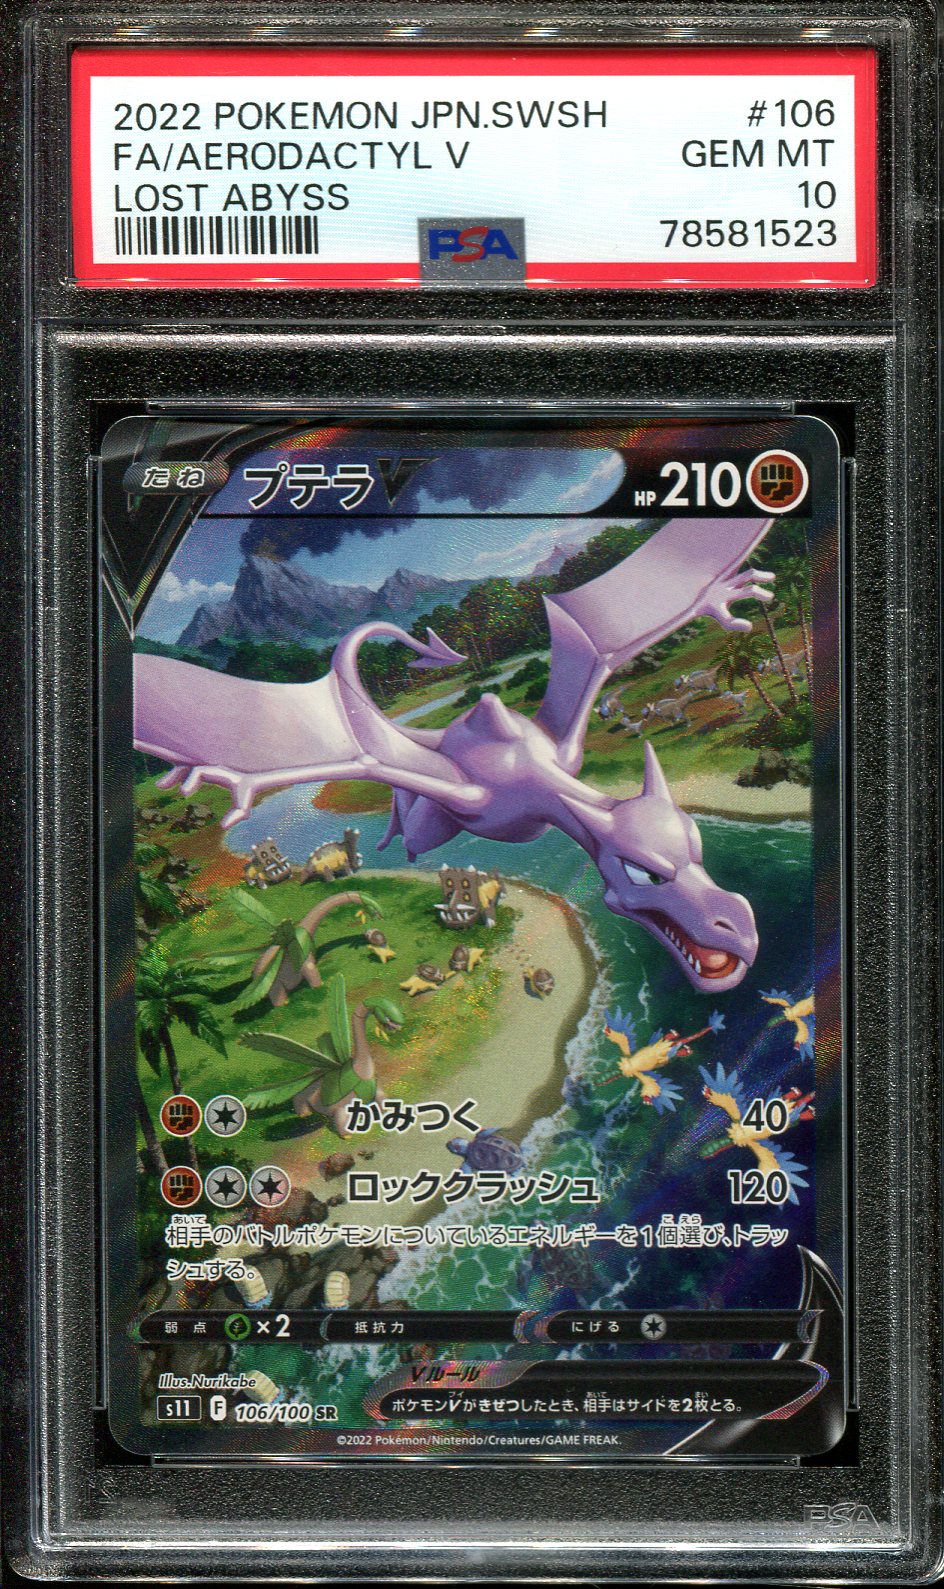 Pulled my chase from Lost Abyss. Aerodactyl V alt art 💜 : r/PokemonTCG